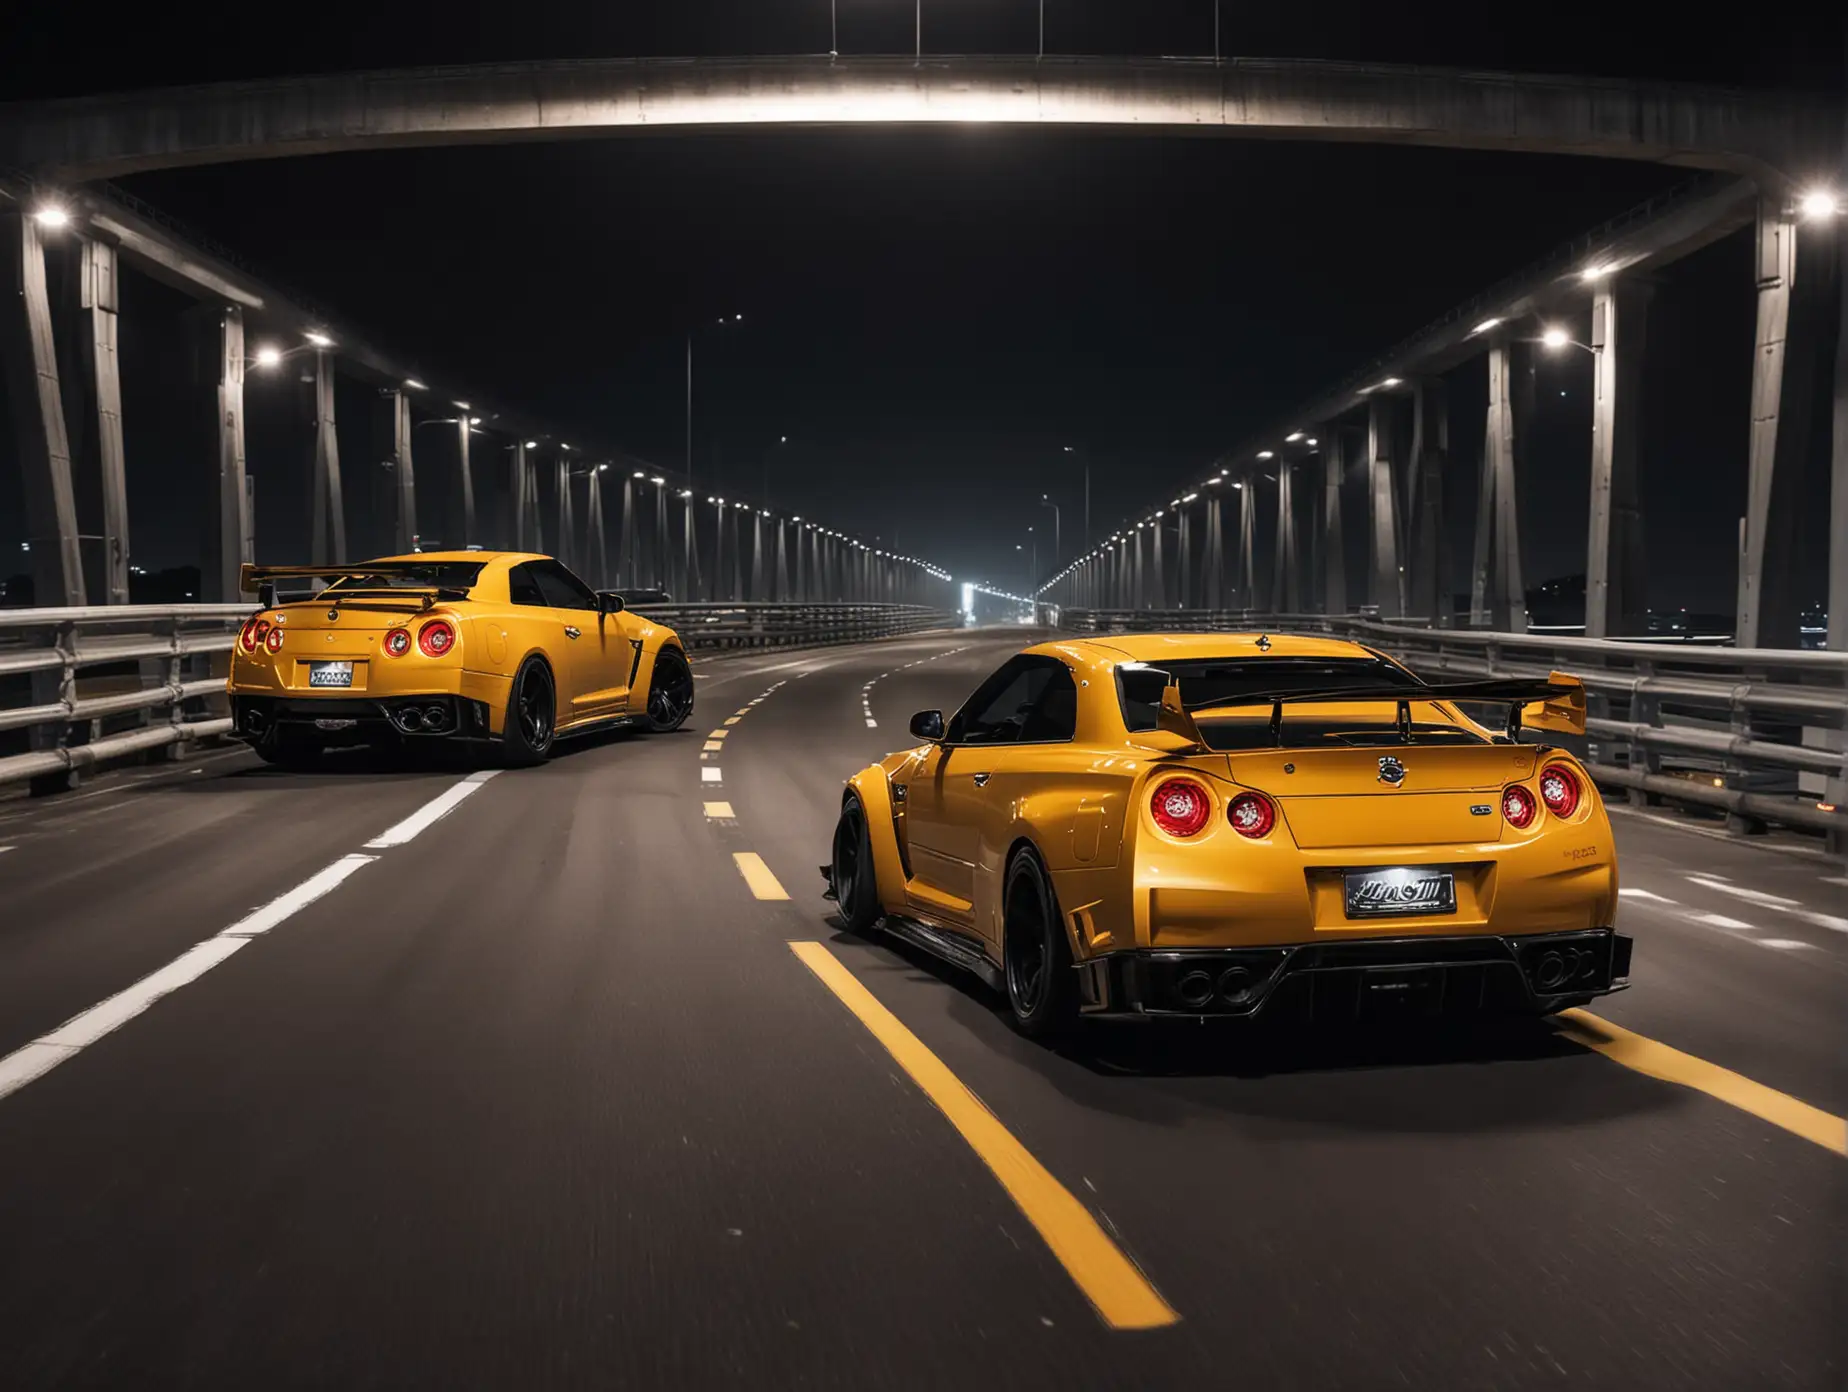 Nissan-GTR-R34-and-Mustard-GT-Driving-on-Elevated-Bridge-at-Night